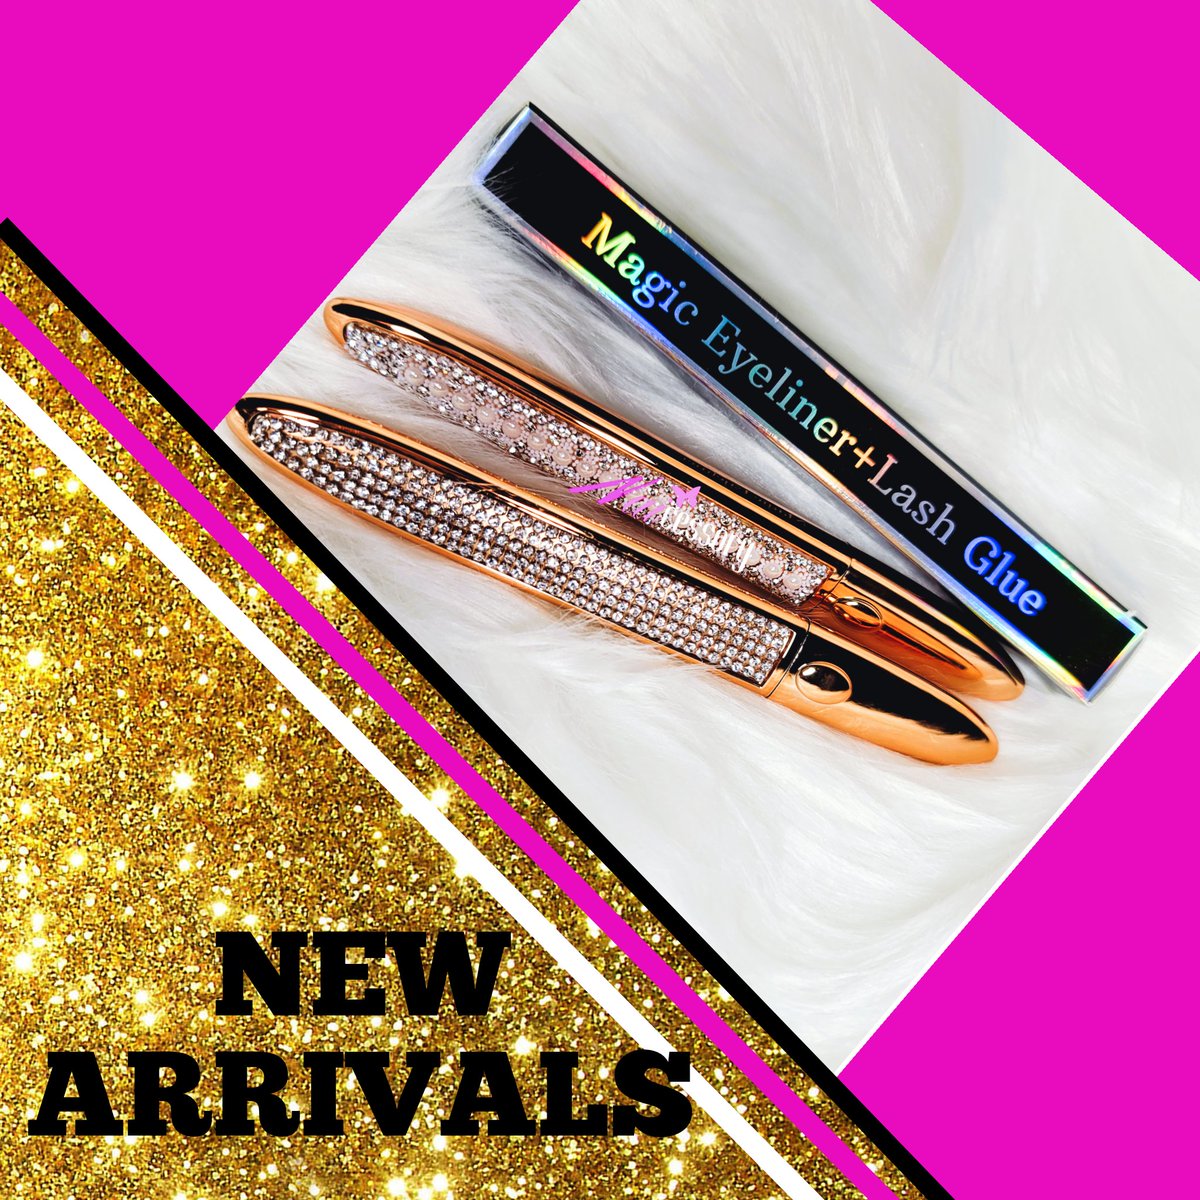 Say bye to that hair glue sis...Get your two in one eyeliner&lash glue right here...First 10 purchases recieve a free pair of eyelashes #BlackOwnedBusinesses #BLACKPINK #SmallBusiness #eyelashglueliner #magiceyeliner